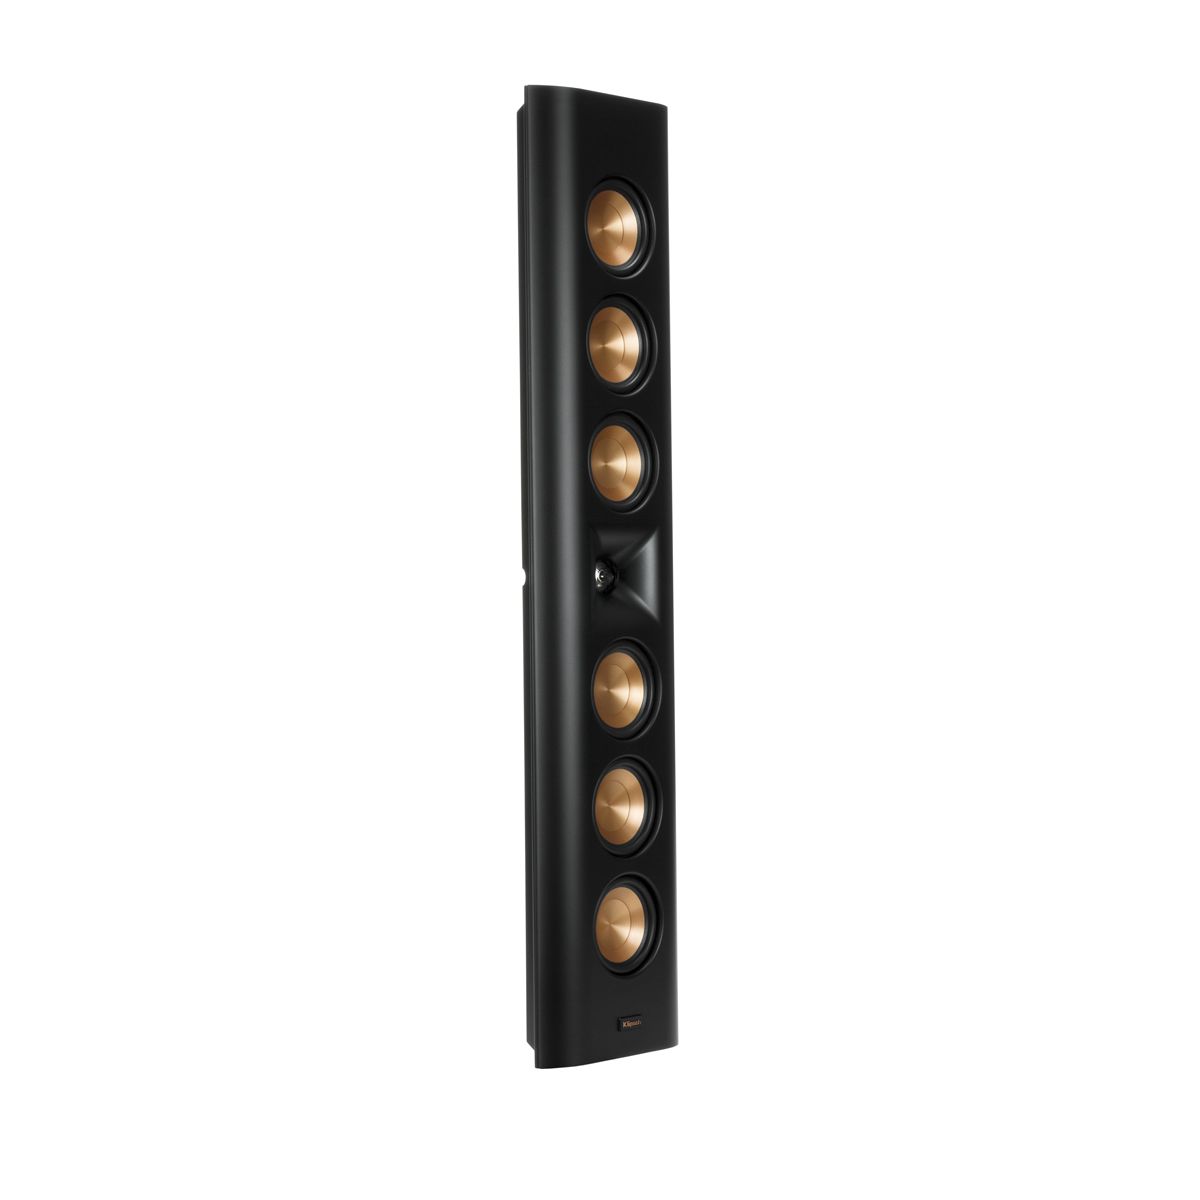 Klipsch RP-640D On-Wall Speaker without grill